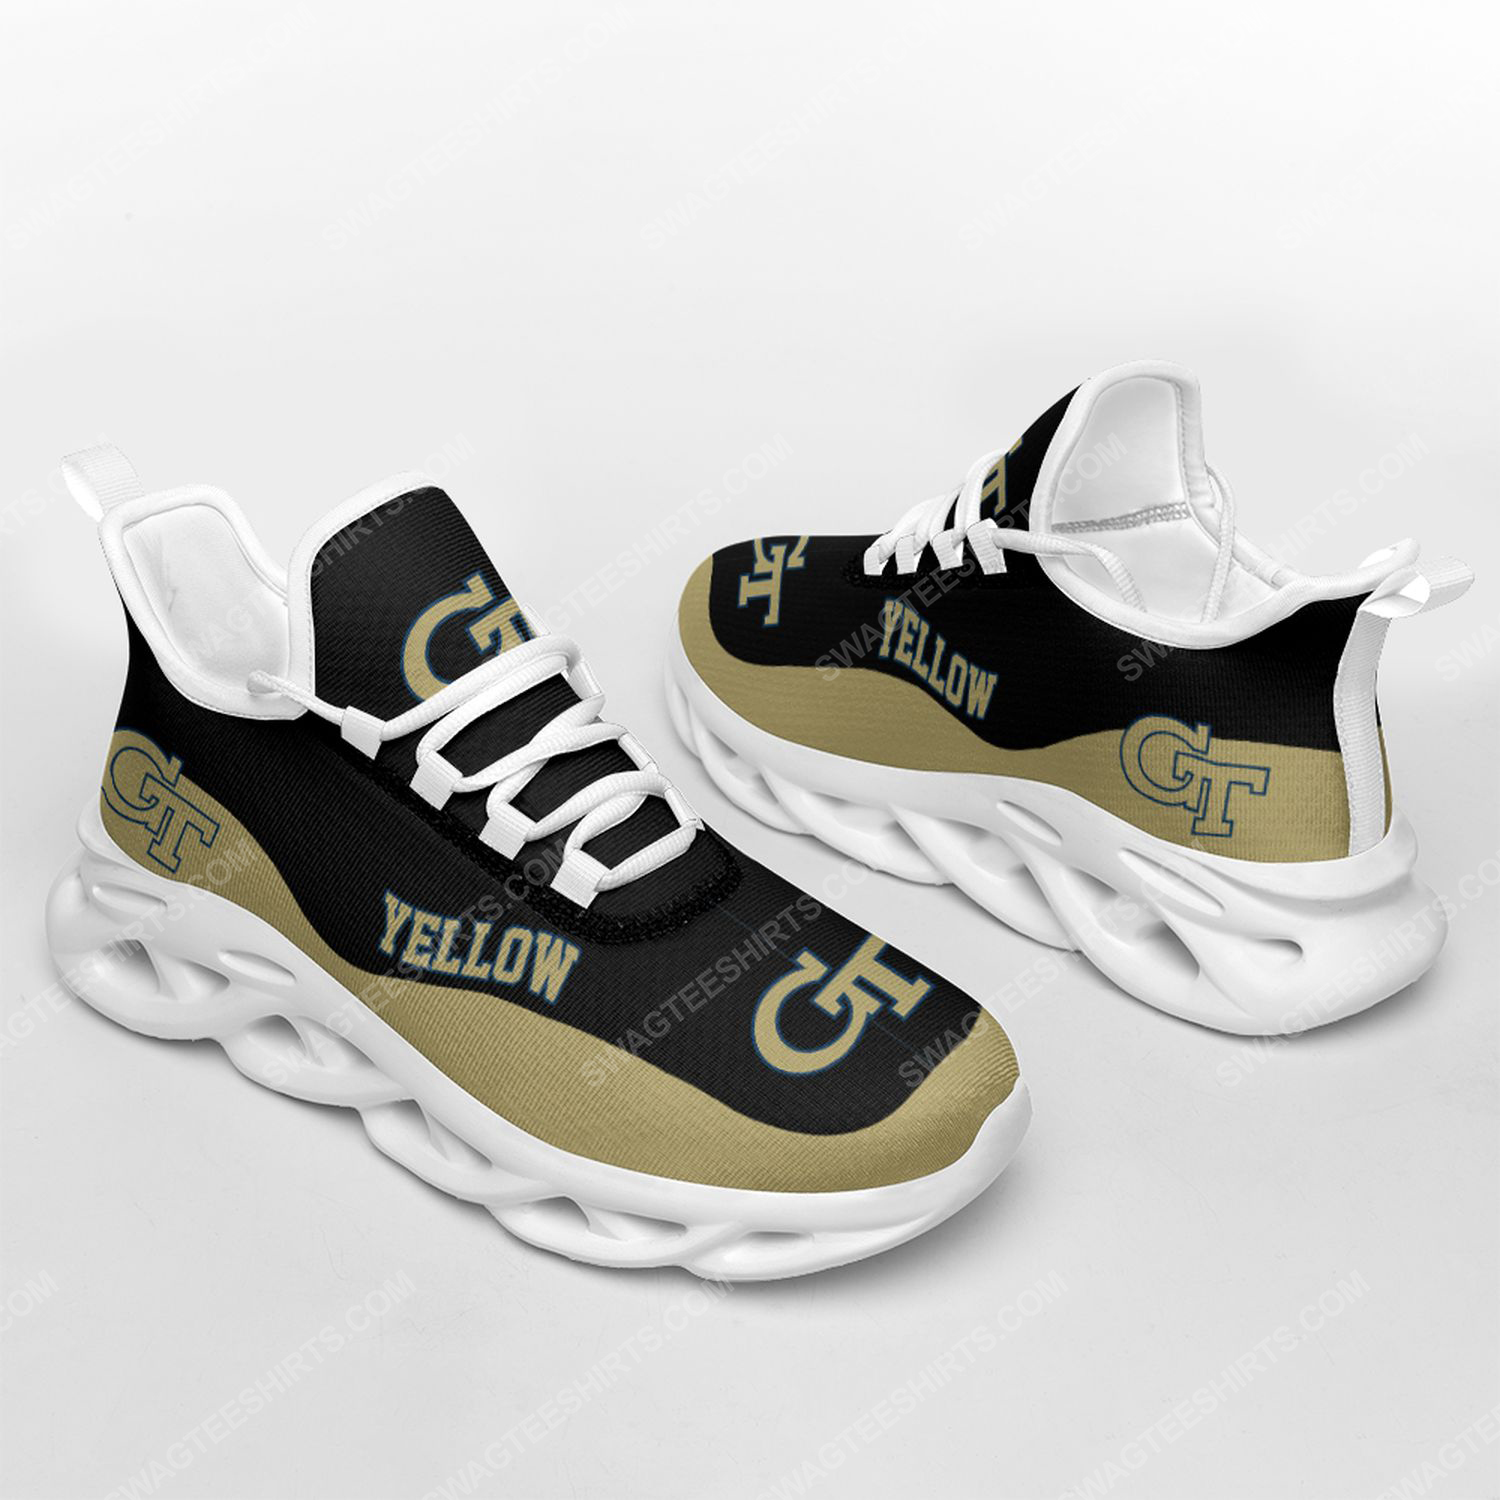 [special edition] The georgia tech yellow jackets football team max soul shoes – Maria